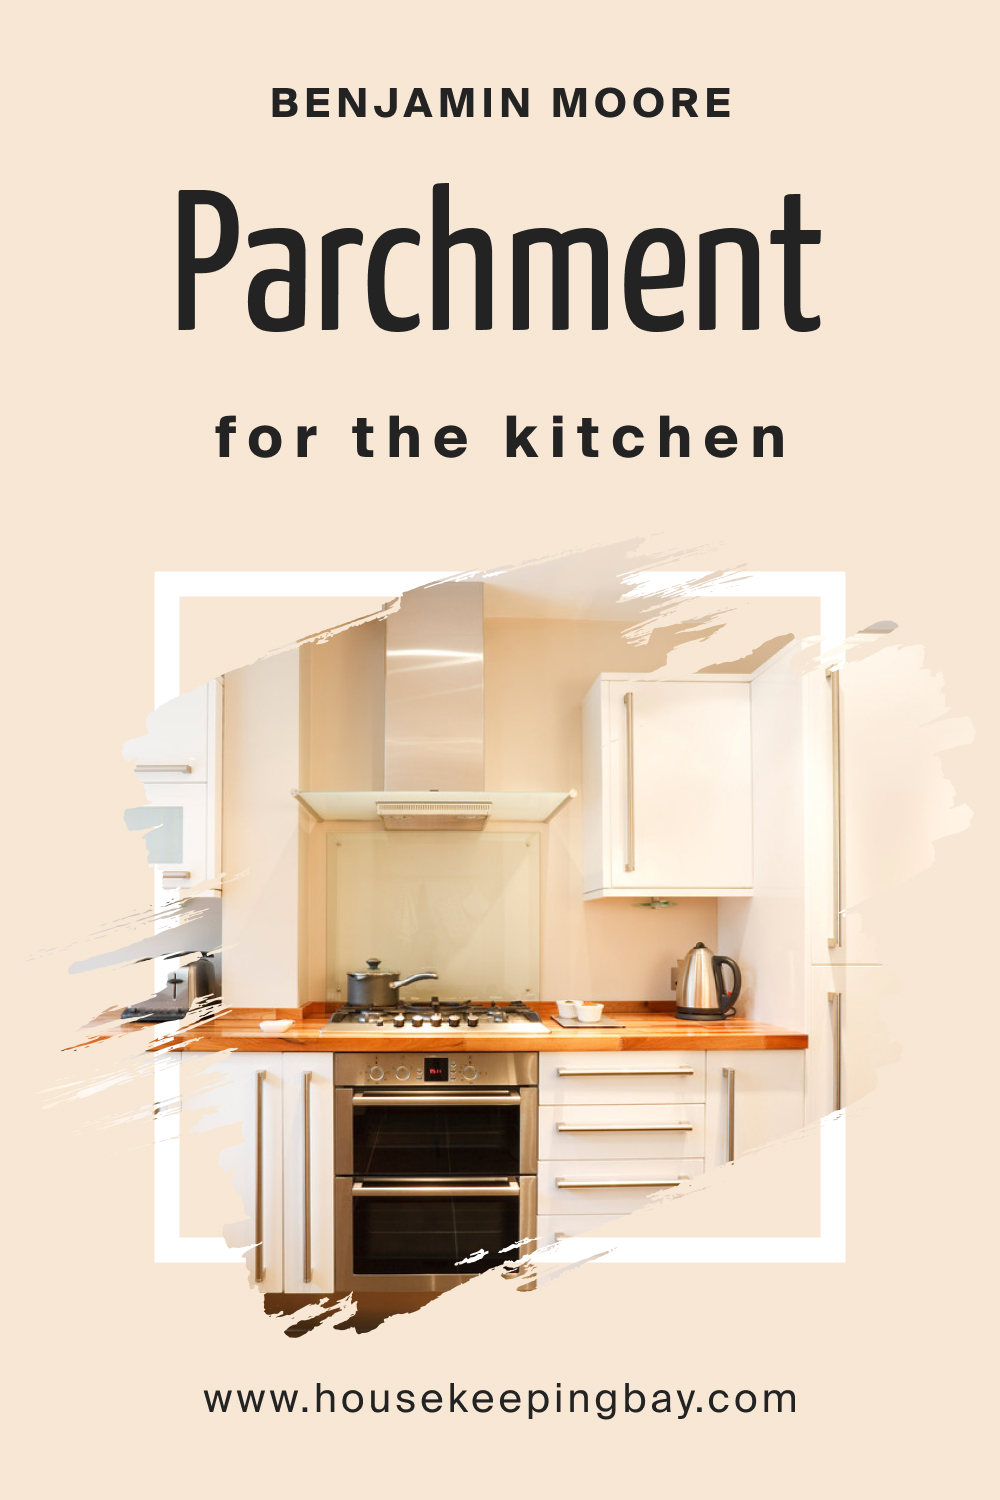 Benjamin Moore. Parchment OC 78 for the Kitchen